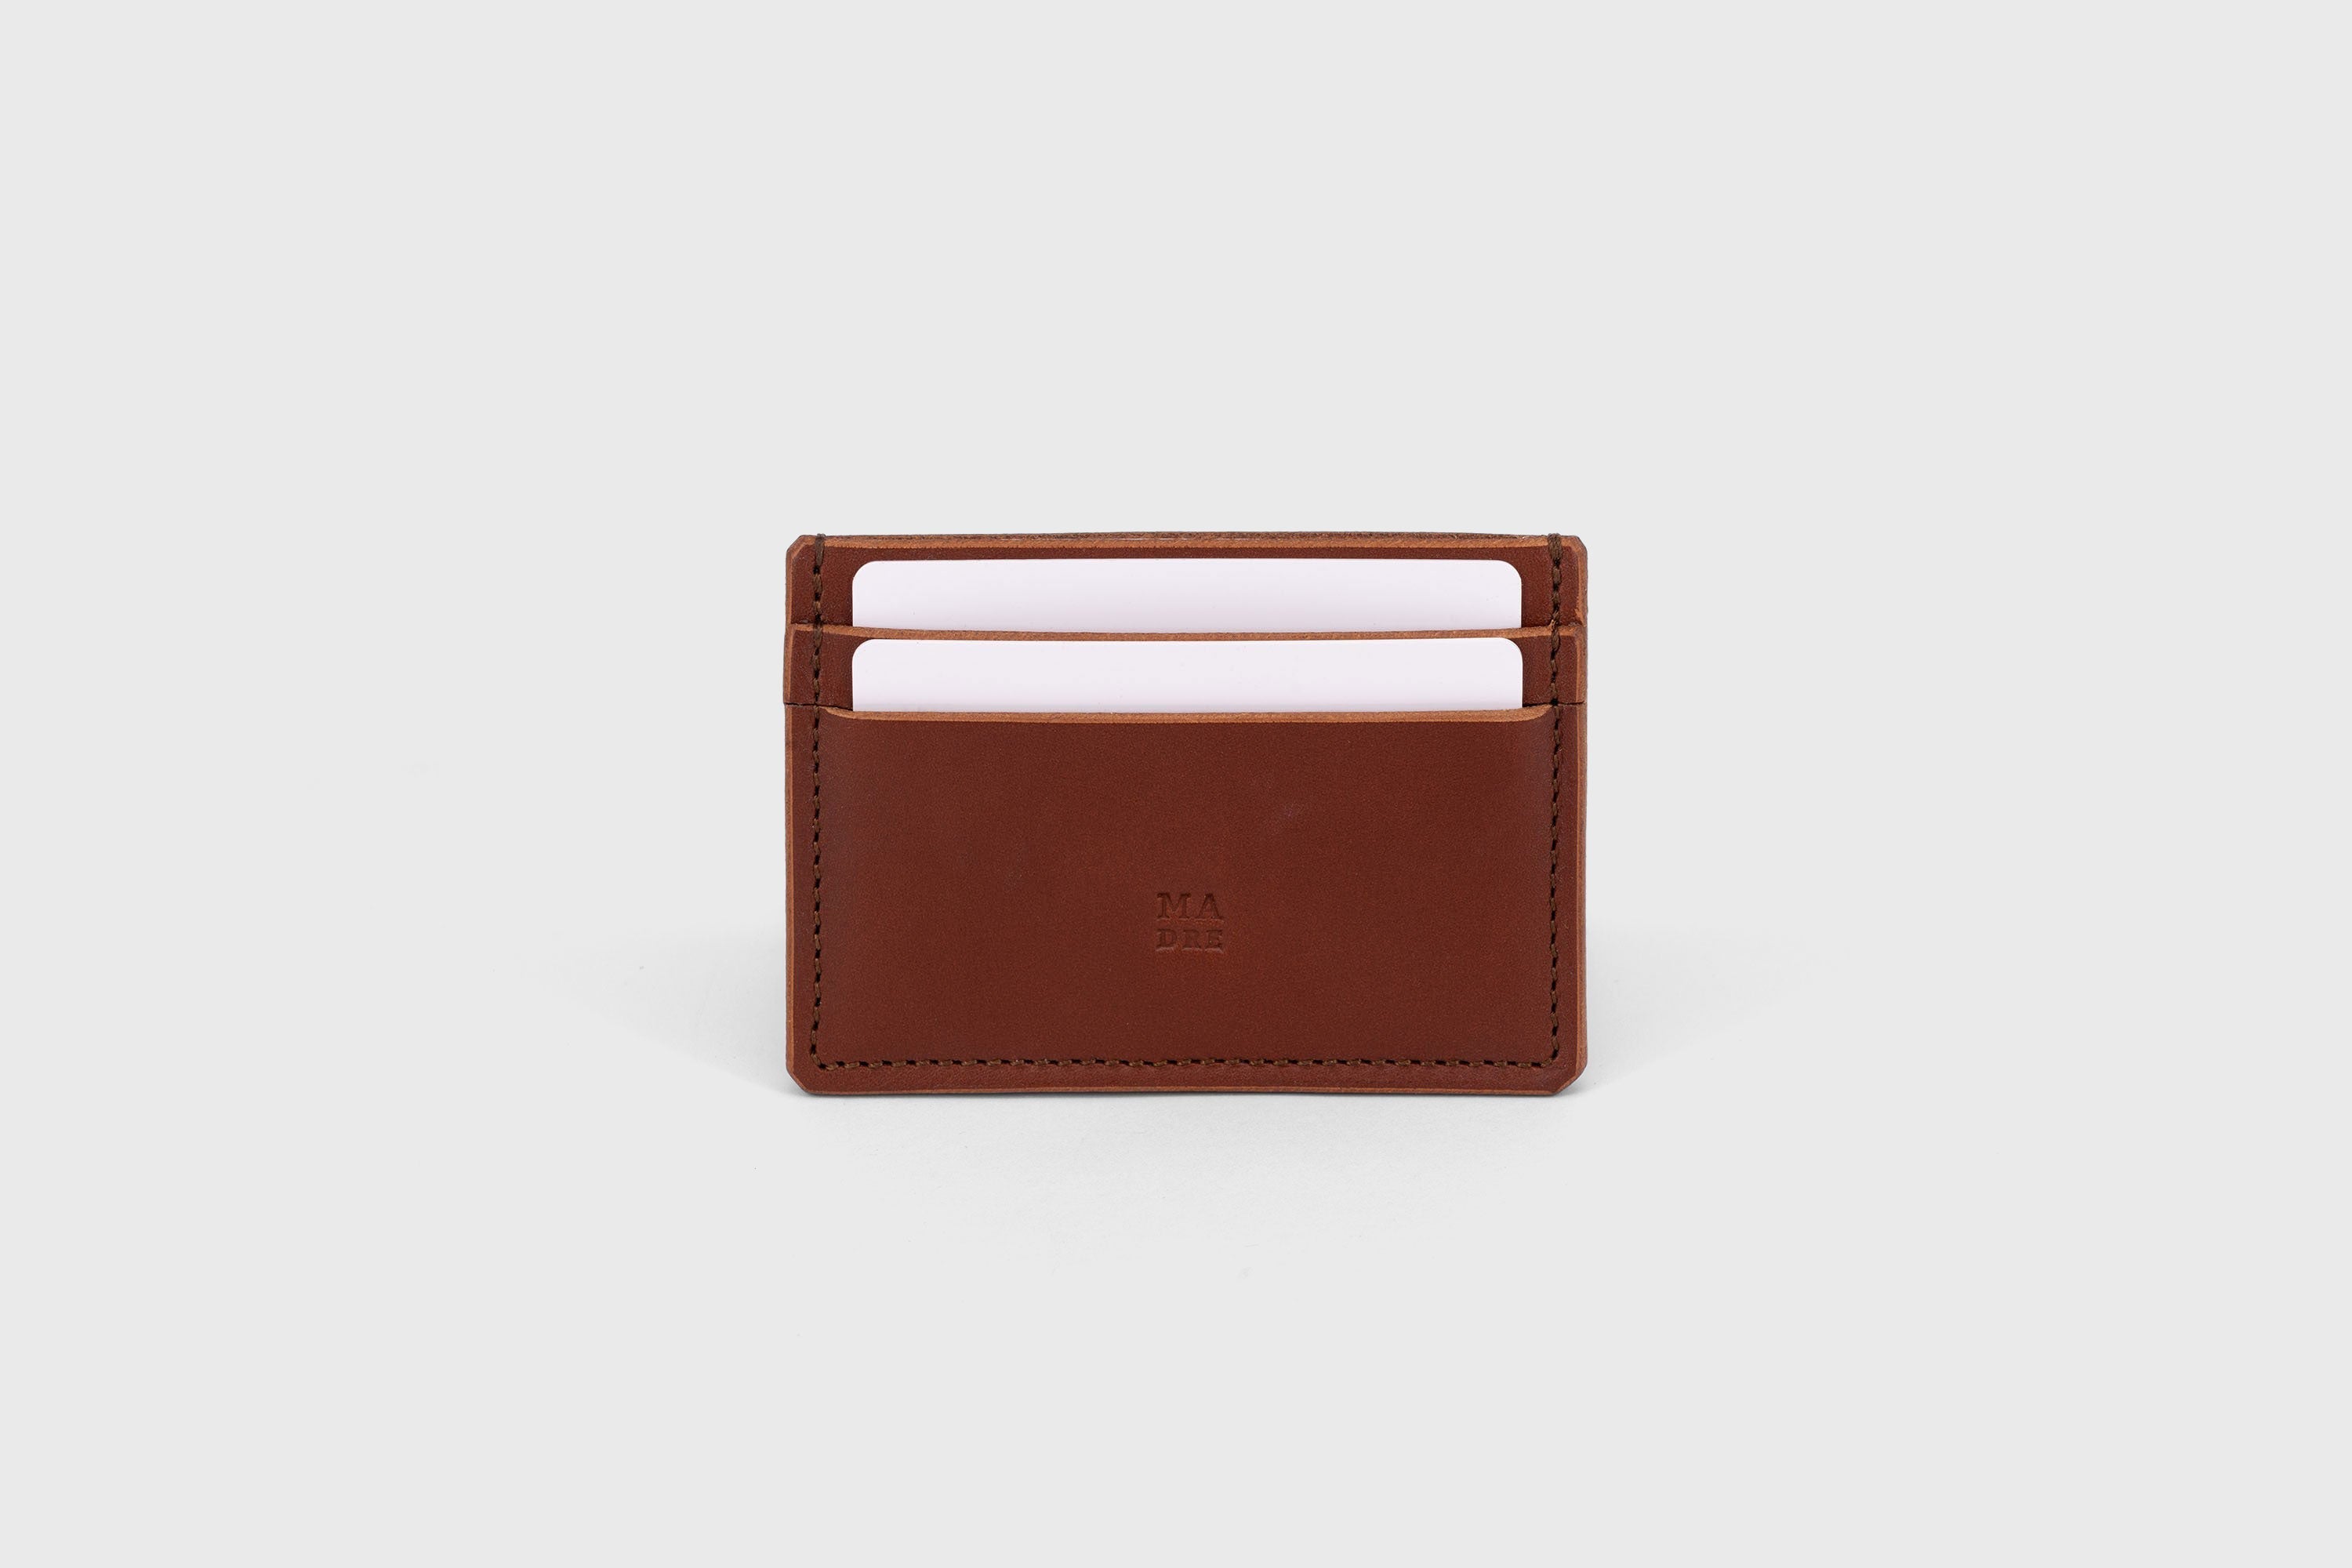 Credit Card Wallet in Dark Brown Leather Vachetta Vegetable Tanned Leather Handmade and Design by Atelier Madre Manuel Dreesmann Barcelona Spain